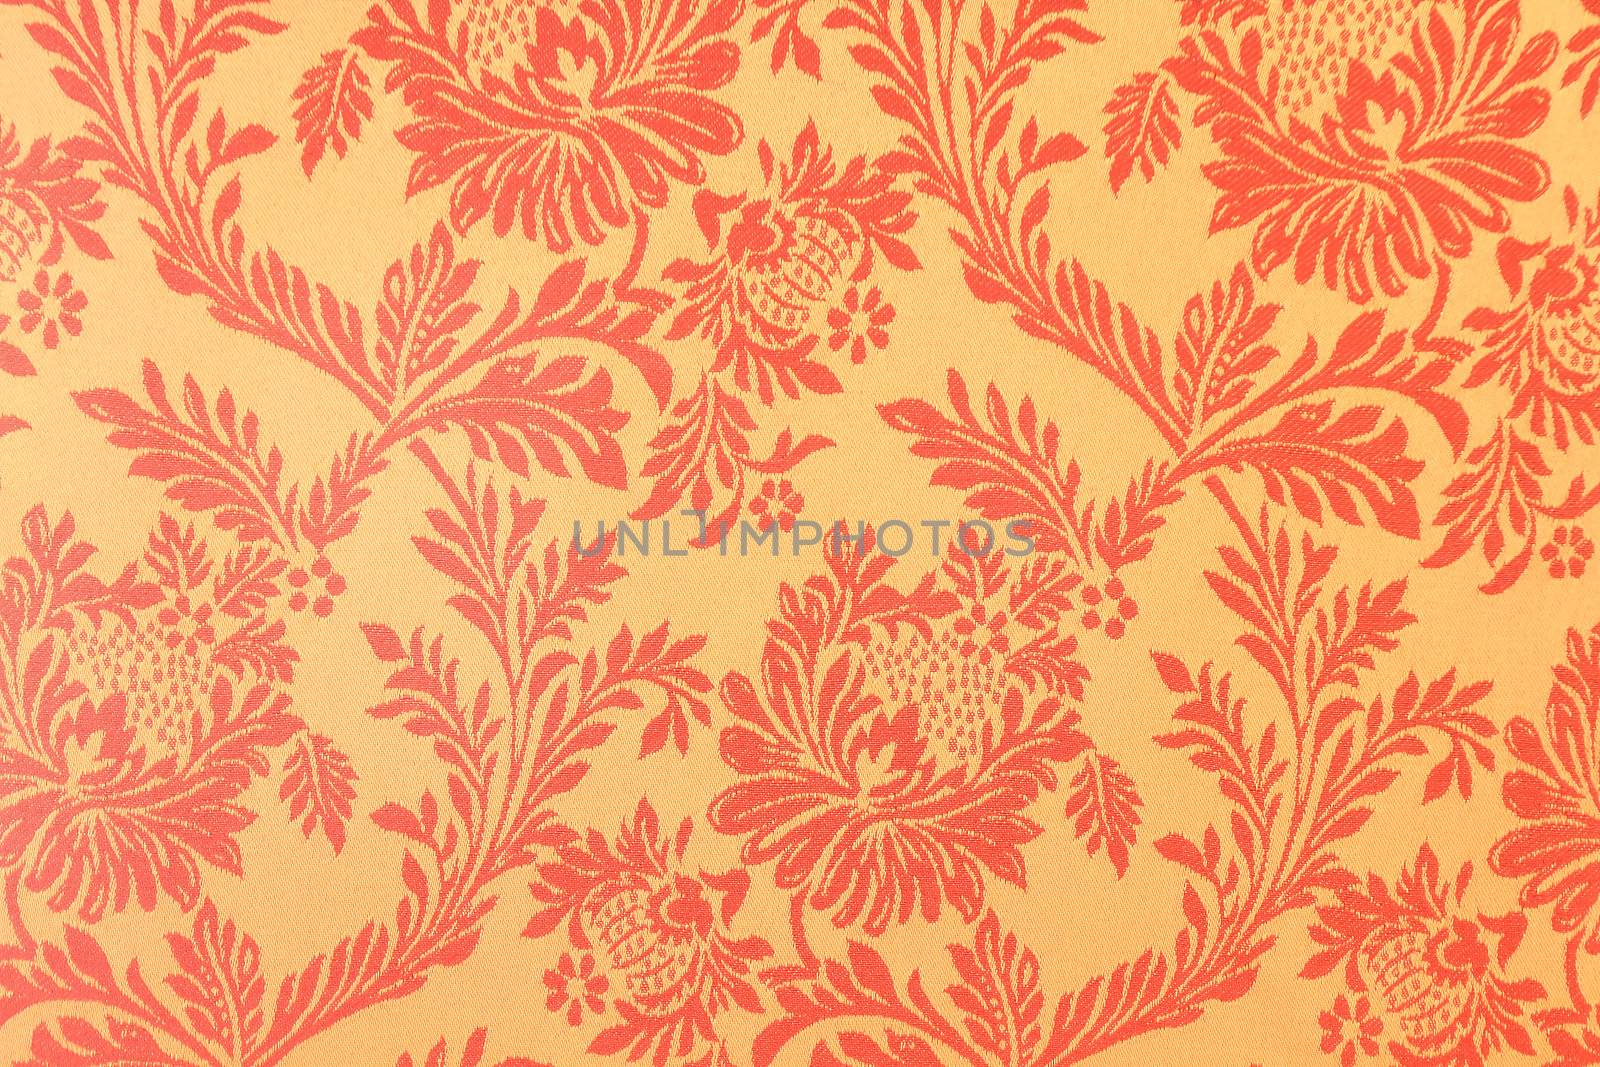   pattern with gold abstract flowers on a red background  by rufous